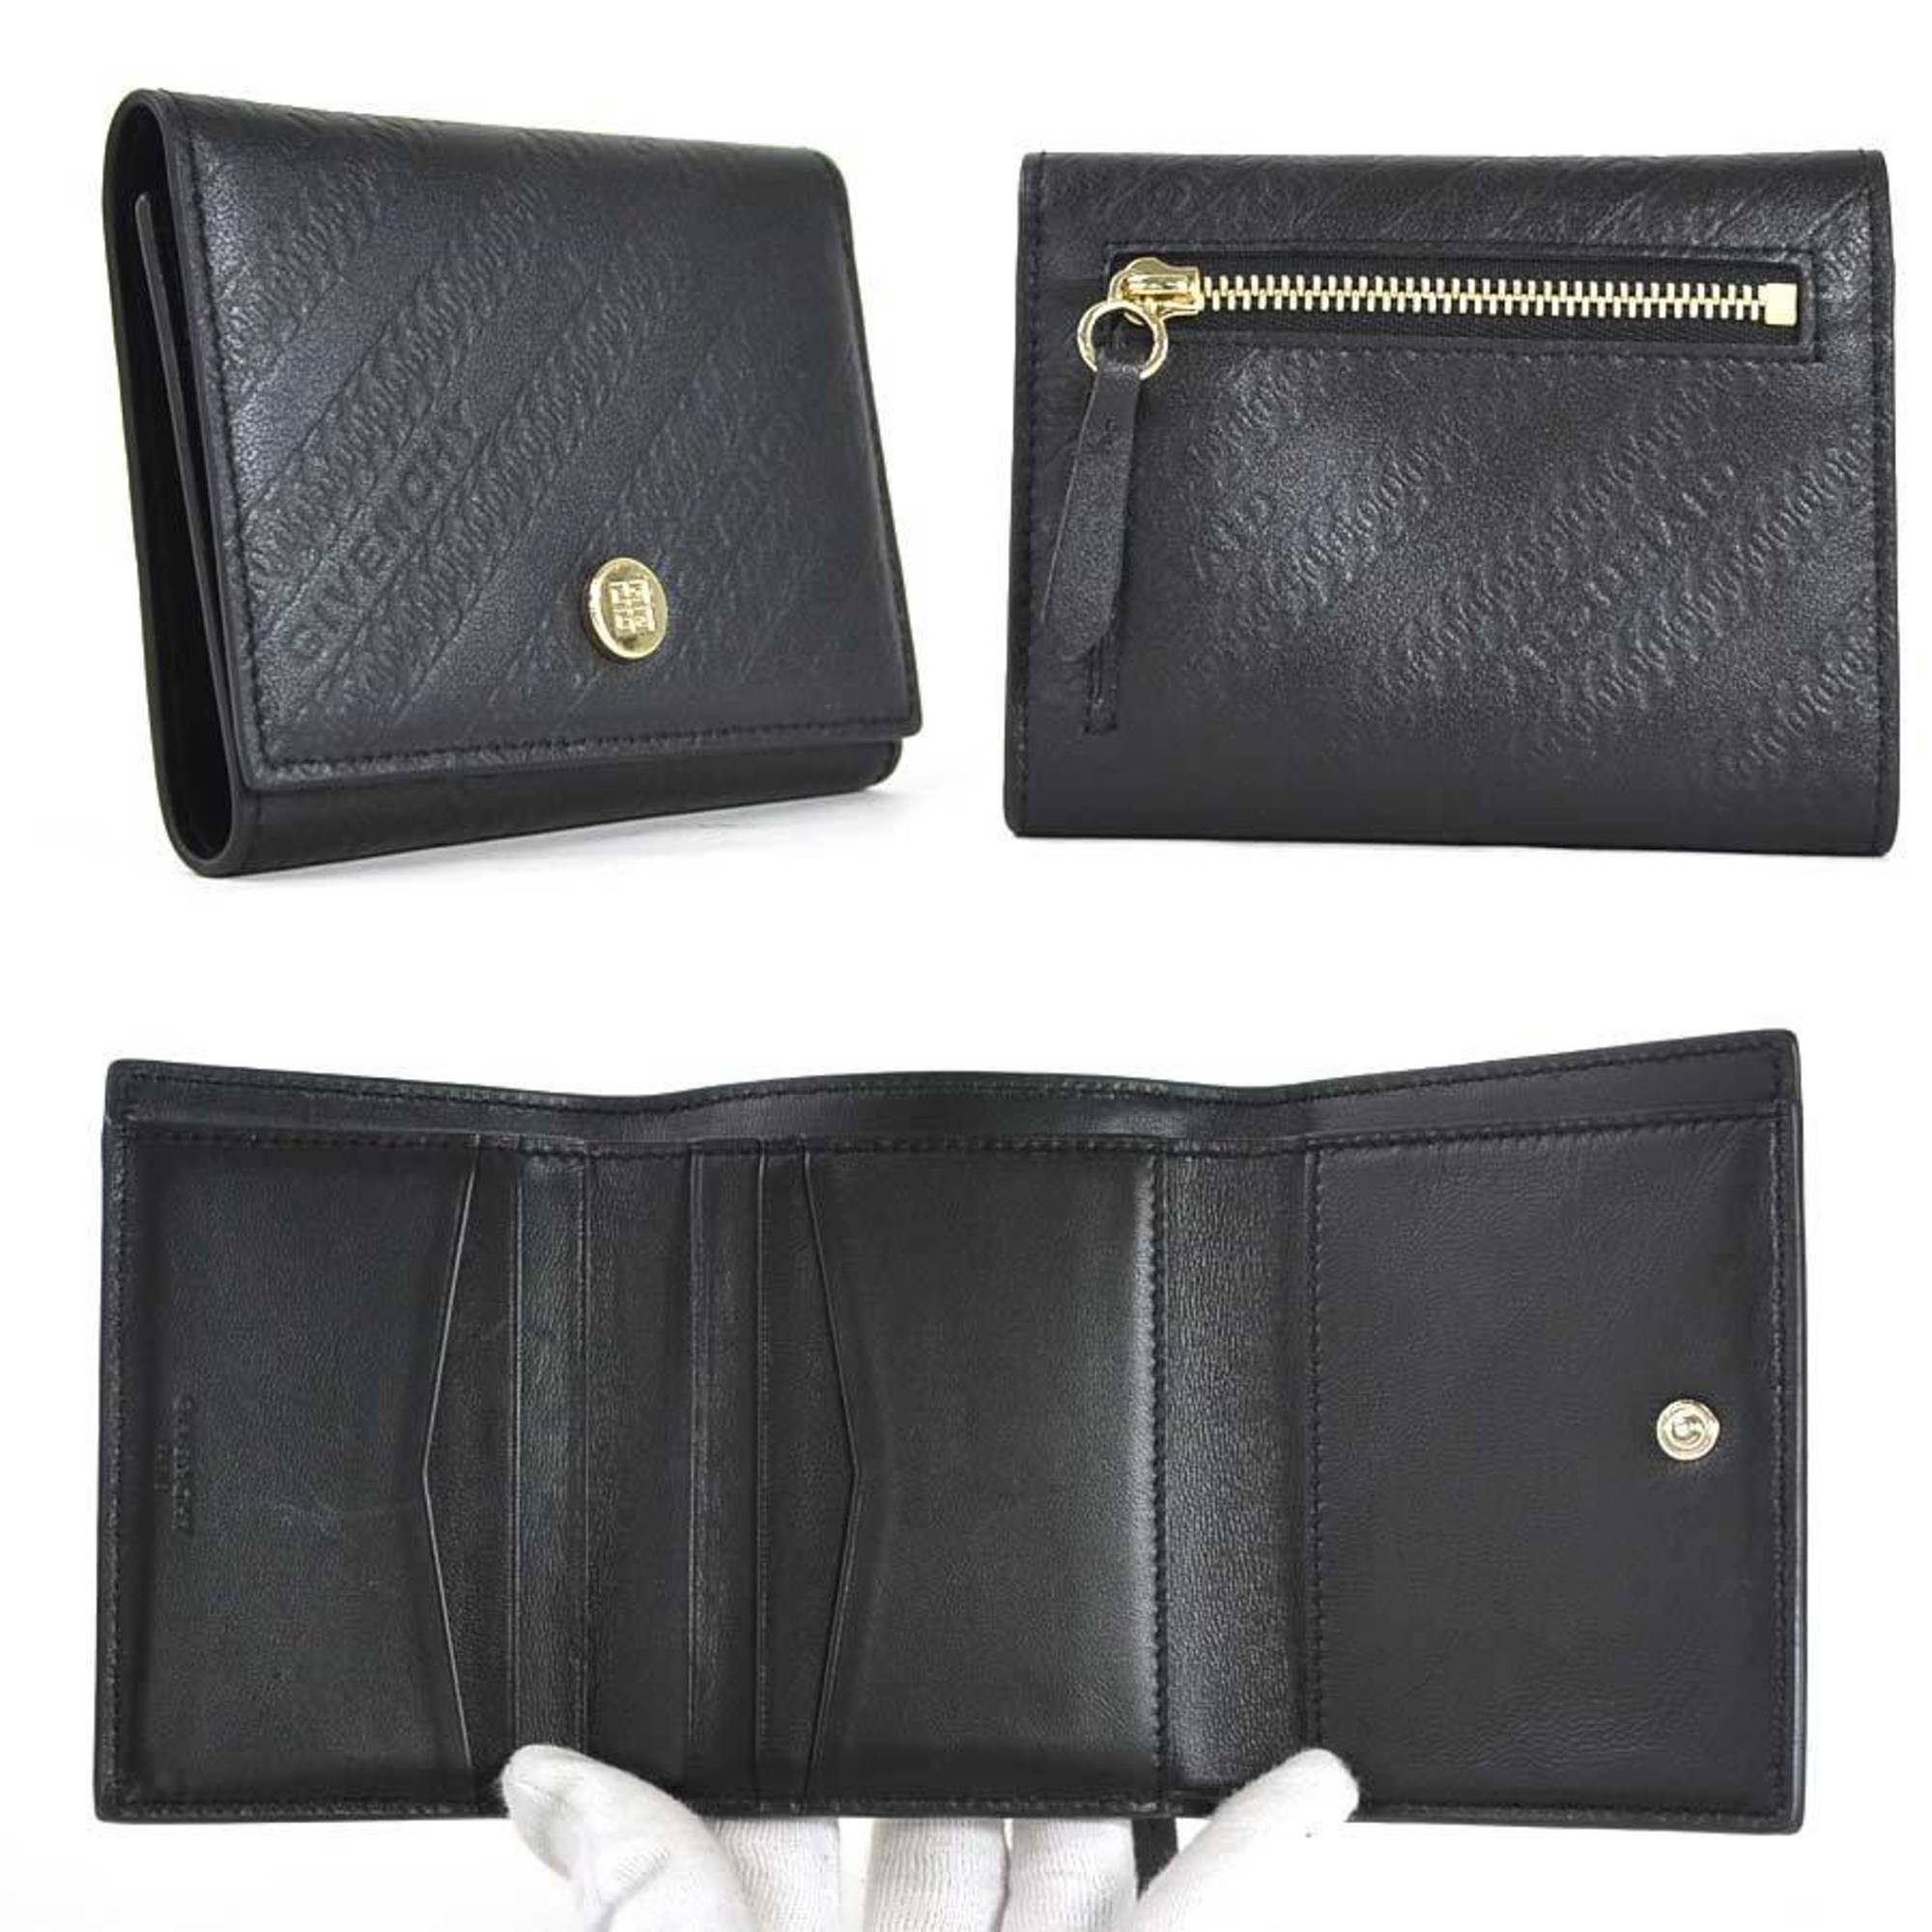 Givenchy Tri-Fold Wallet Black Leather Gold Hardware Ladies